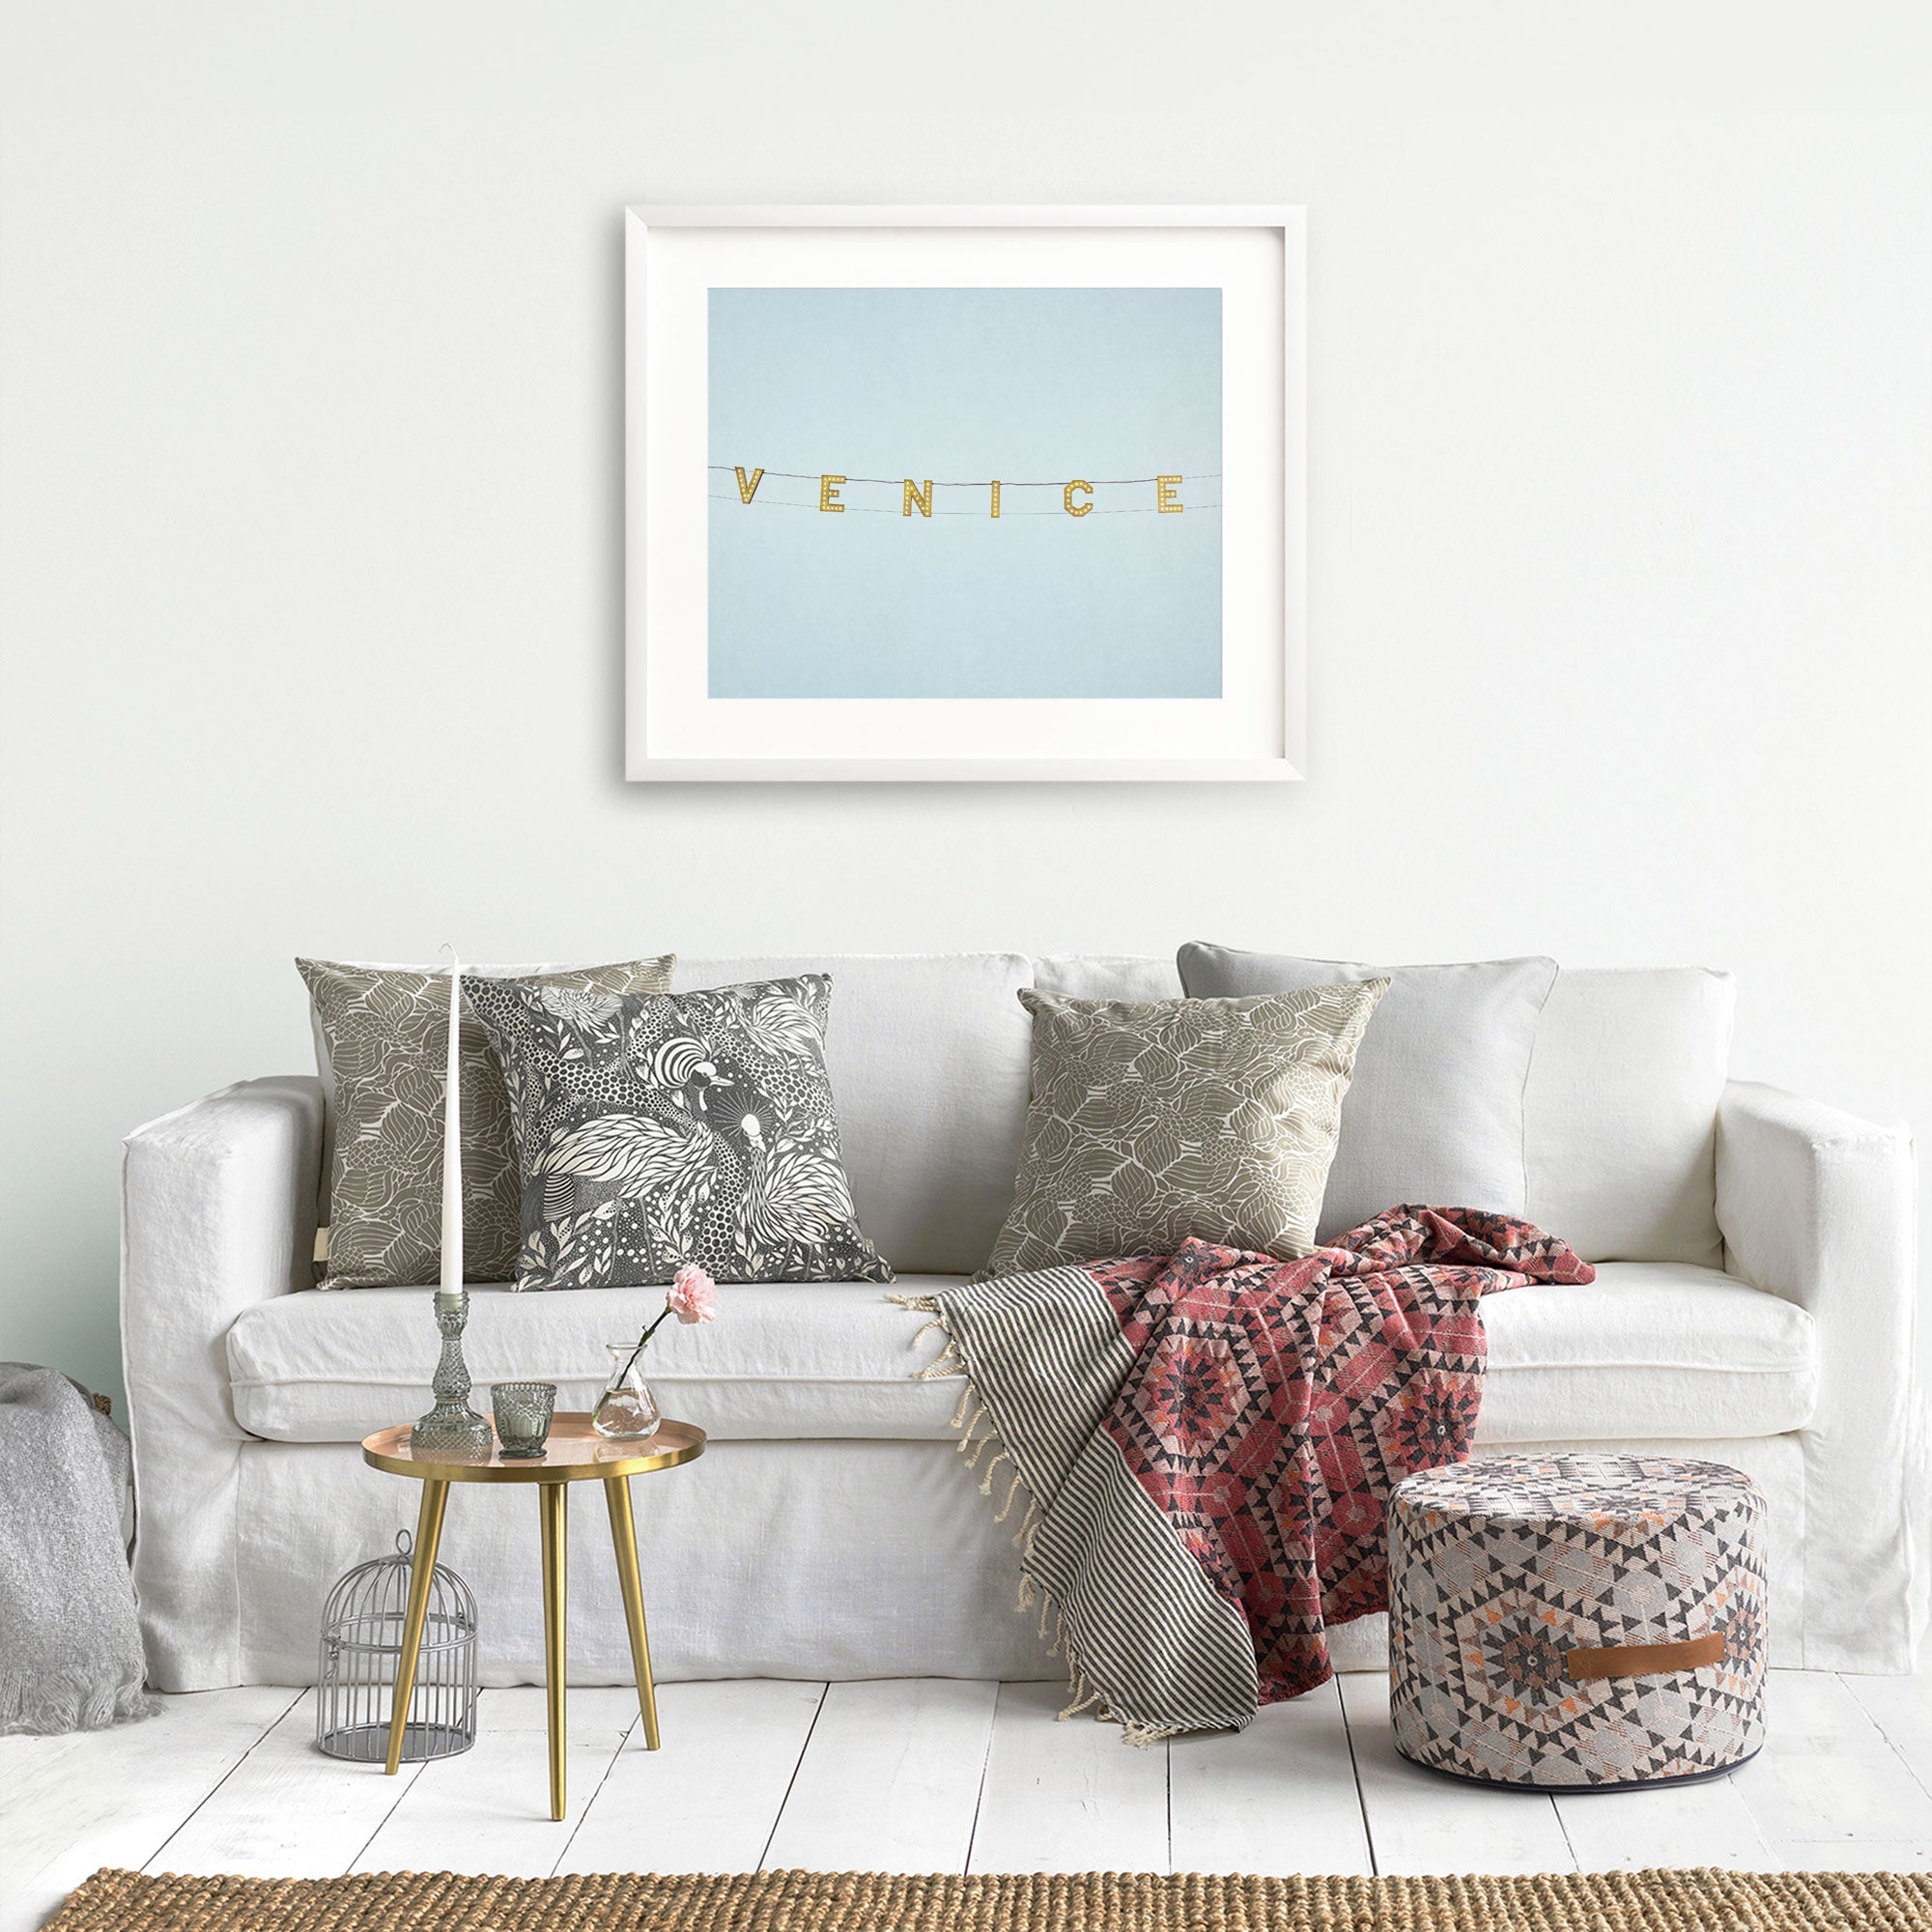 A cozy living room corner with a white sofa adorned with patterned pillows, a red blanket, and unframed California coastal photography prints on the wall above. A small side table with books and a Offley Green's Venice Beach Sign Print, 'Blue Venice'.